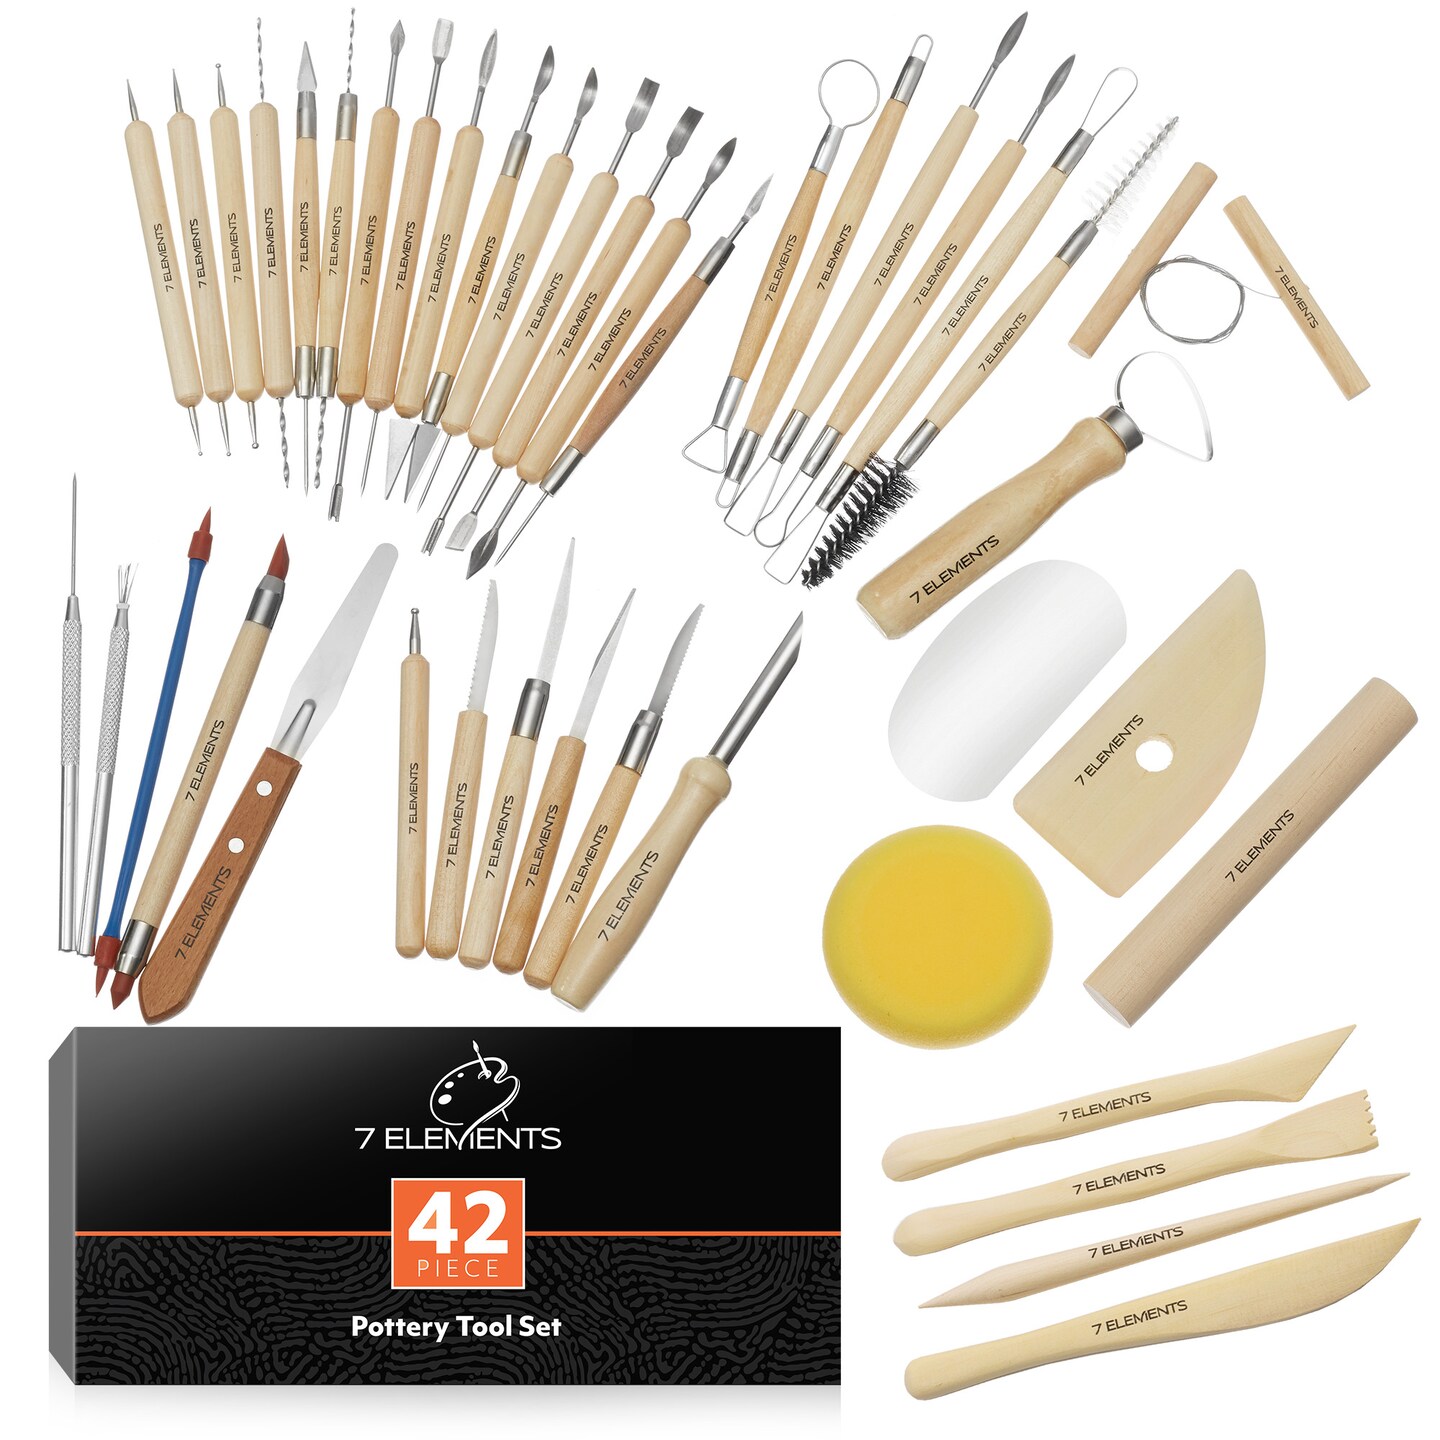 Clay Shaper Set #2 By Craft Smart®